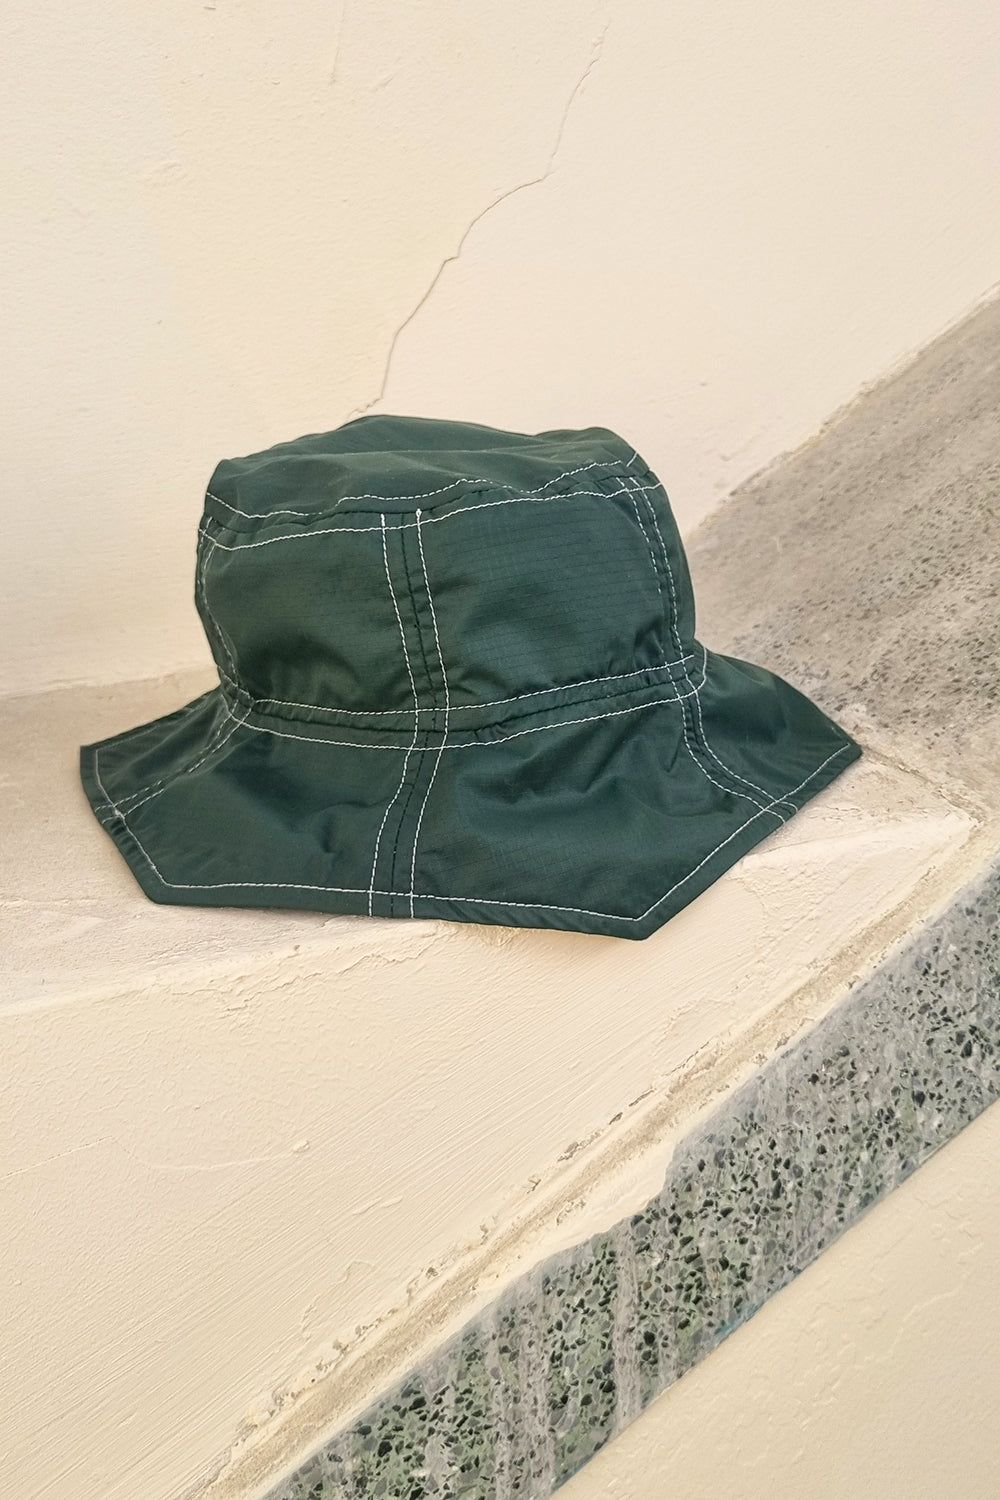 1800 Gallons LIMITED Upcycled Green Raincoat Hexy Hat